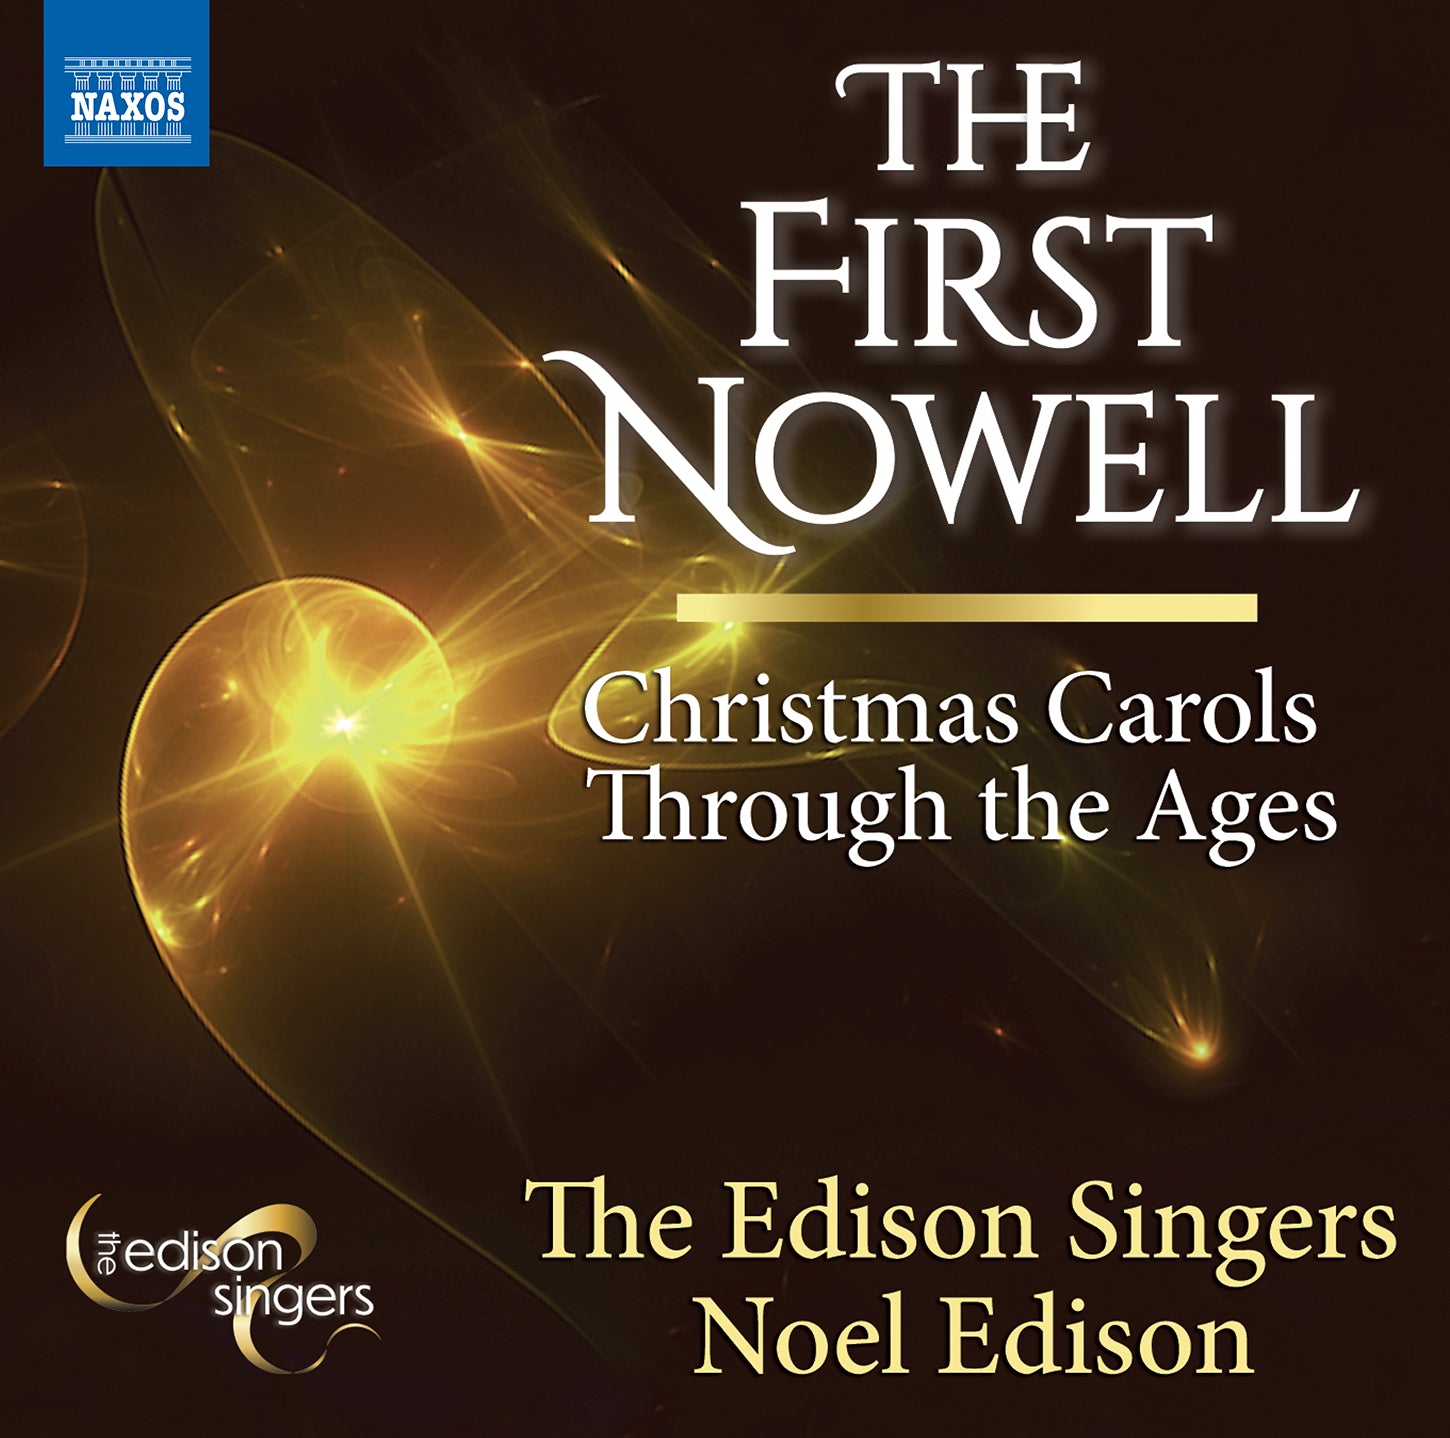 The First Nowell - Christmas Carols Through the Ages / The Edison Singers